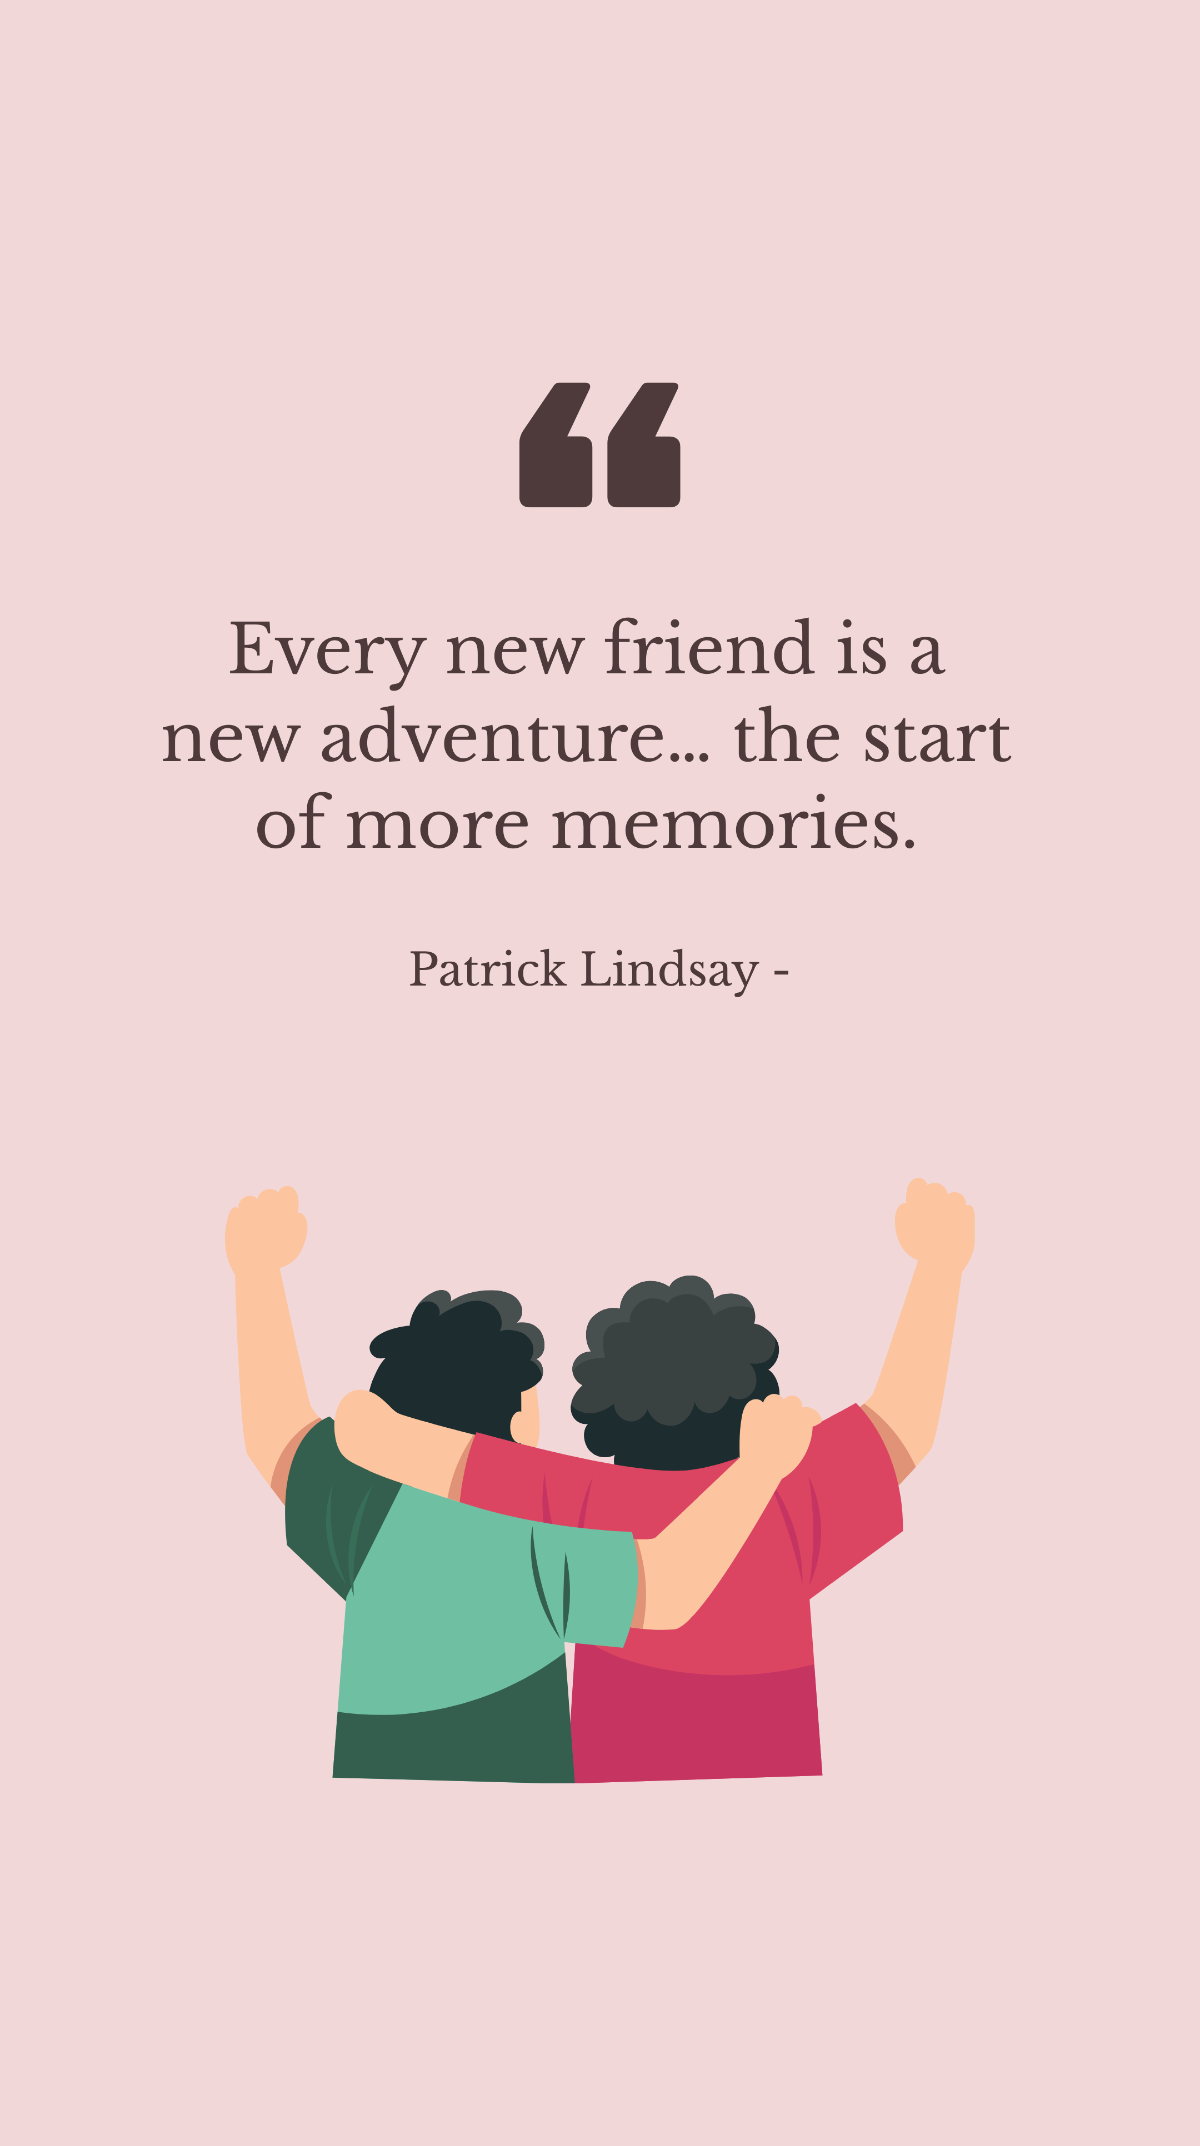 Patrick Lindsay - Every new friend is a new adventure… the start of more memories. Template